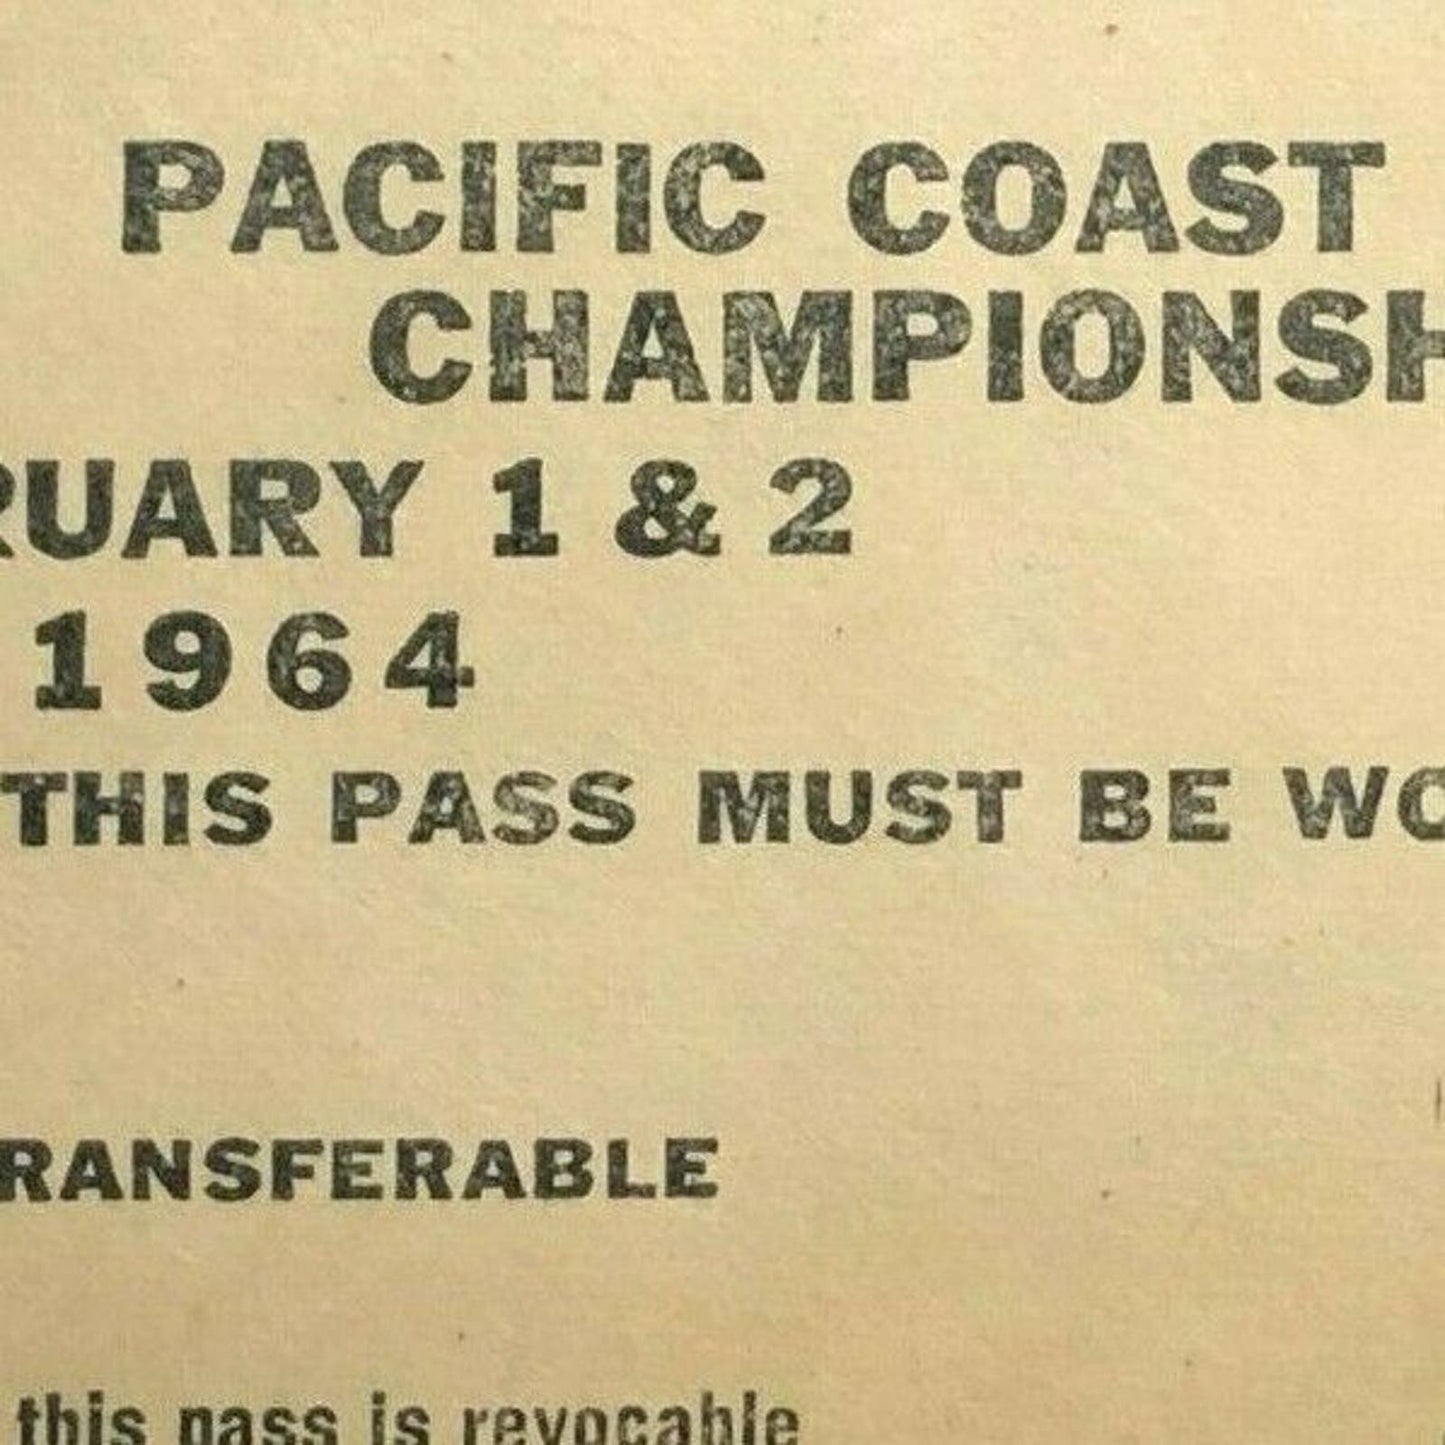 Vintage Pacific Coast Divisional Championship Race Pass / Ticket Feb 1 & 2 1964